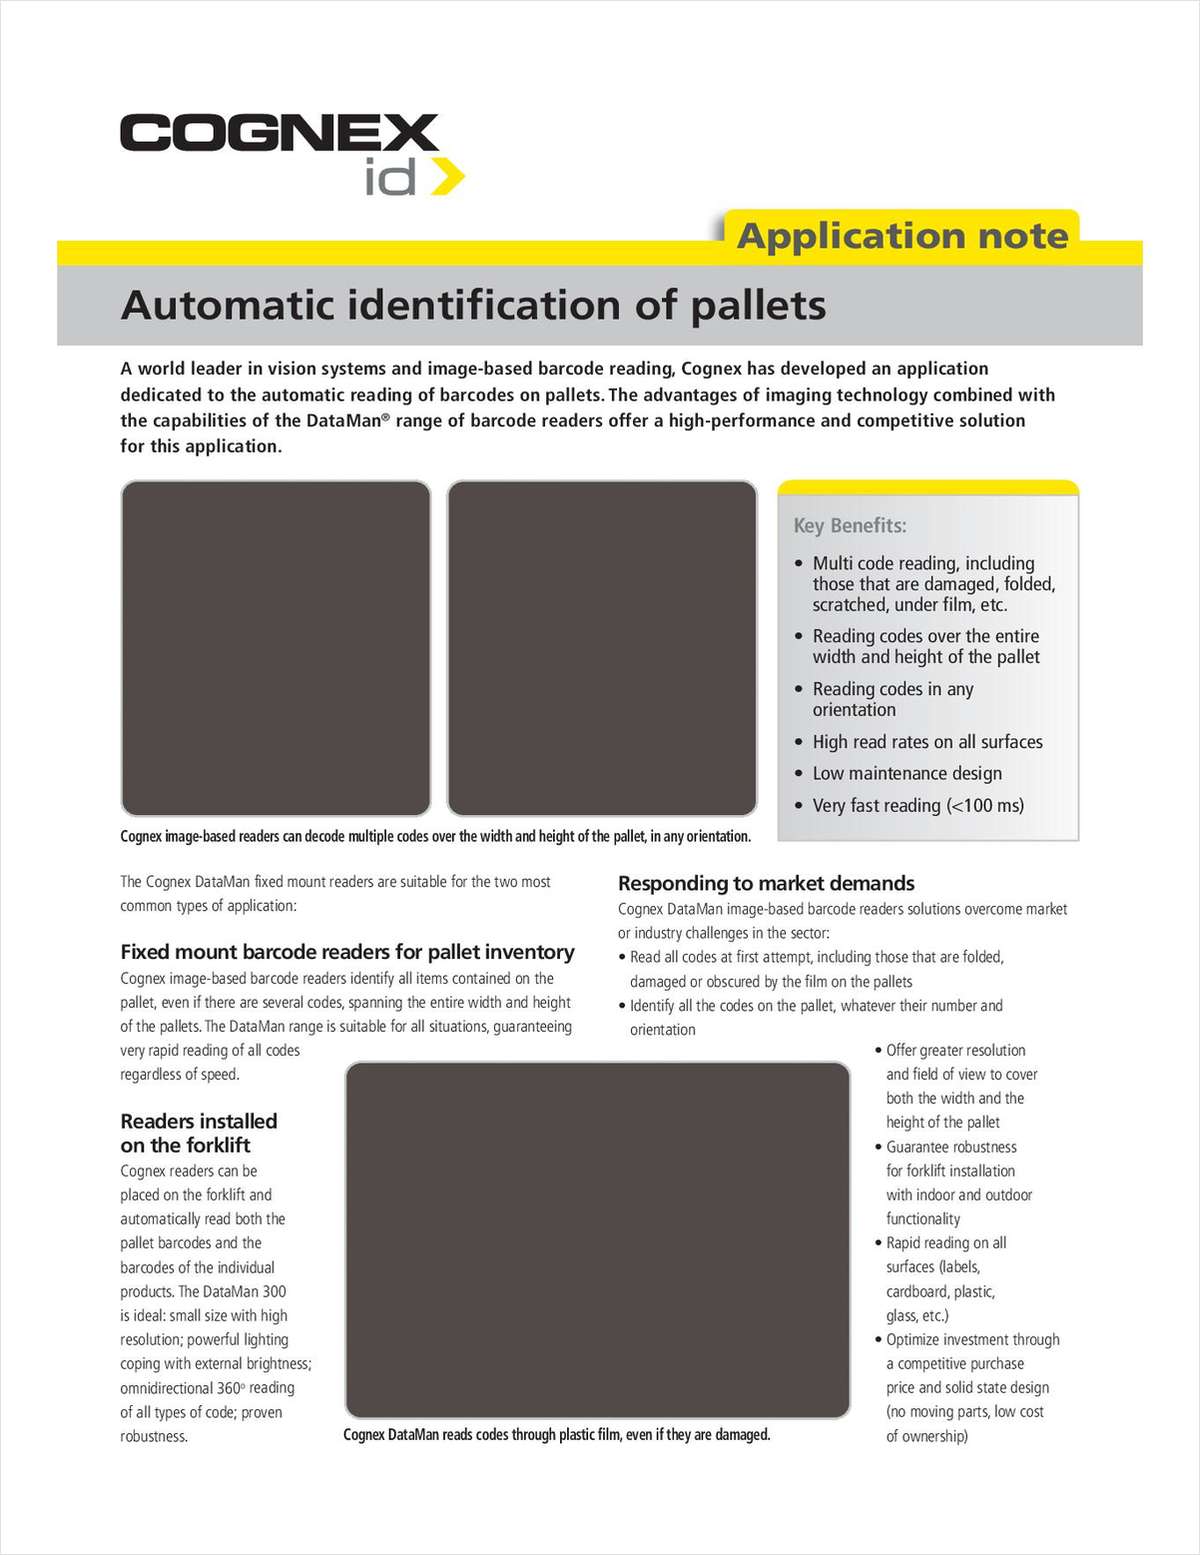 Automatic Identification of Pallets